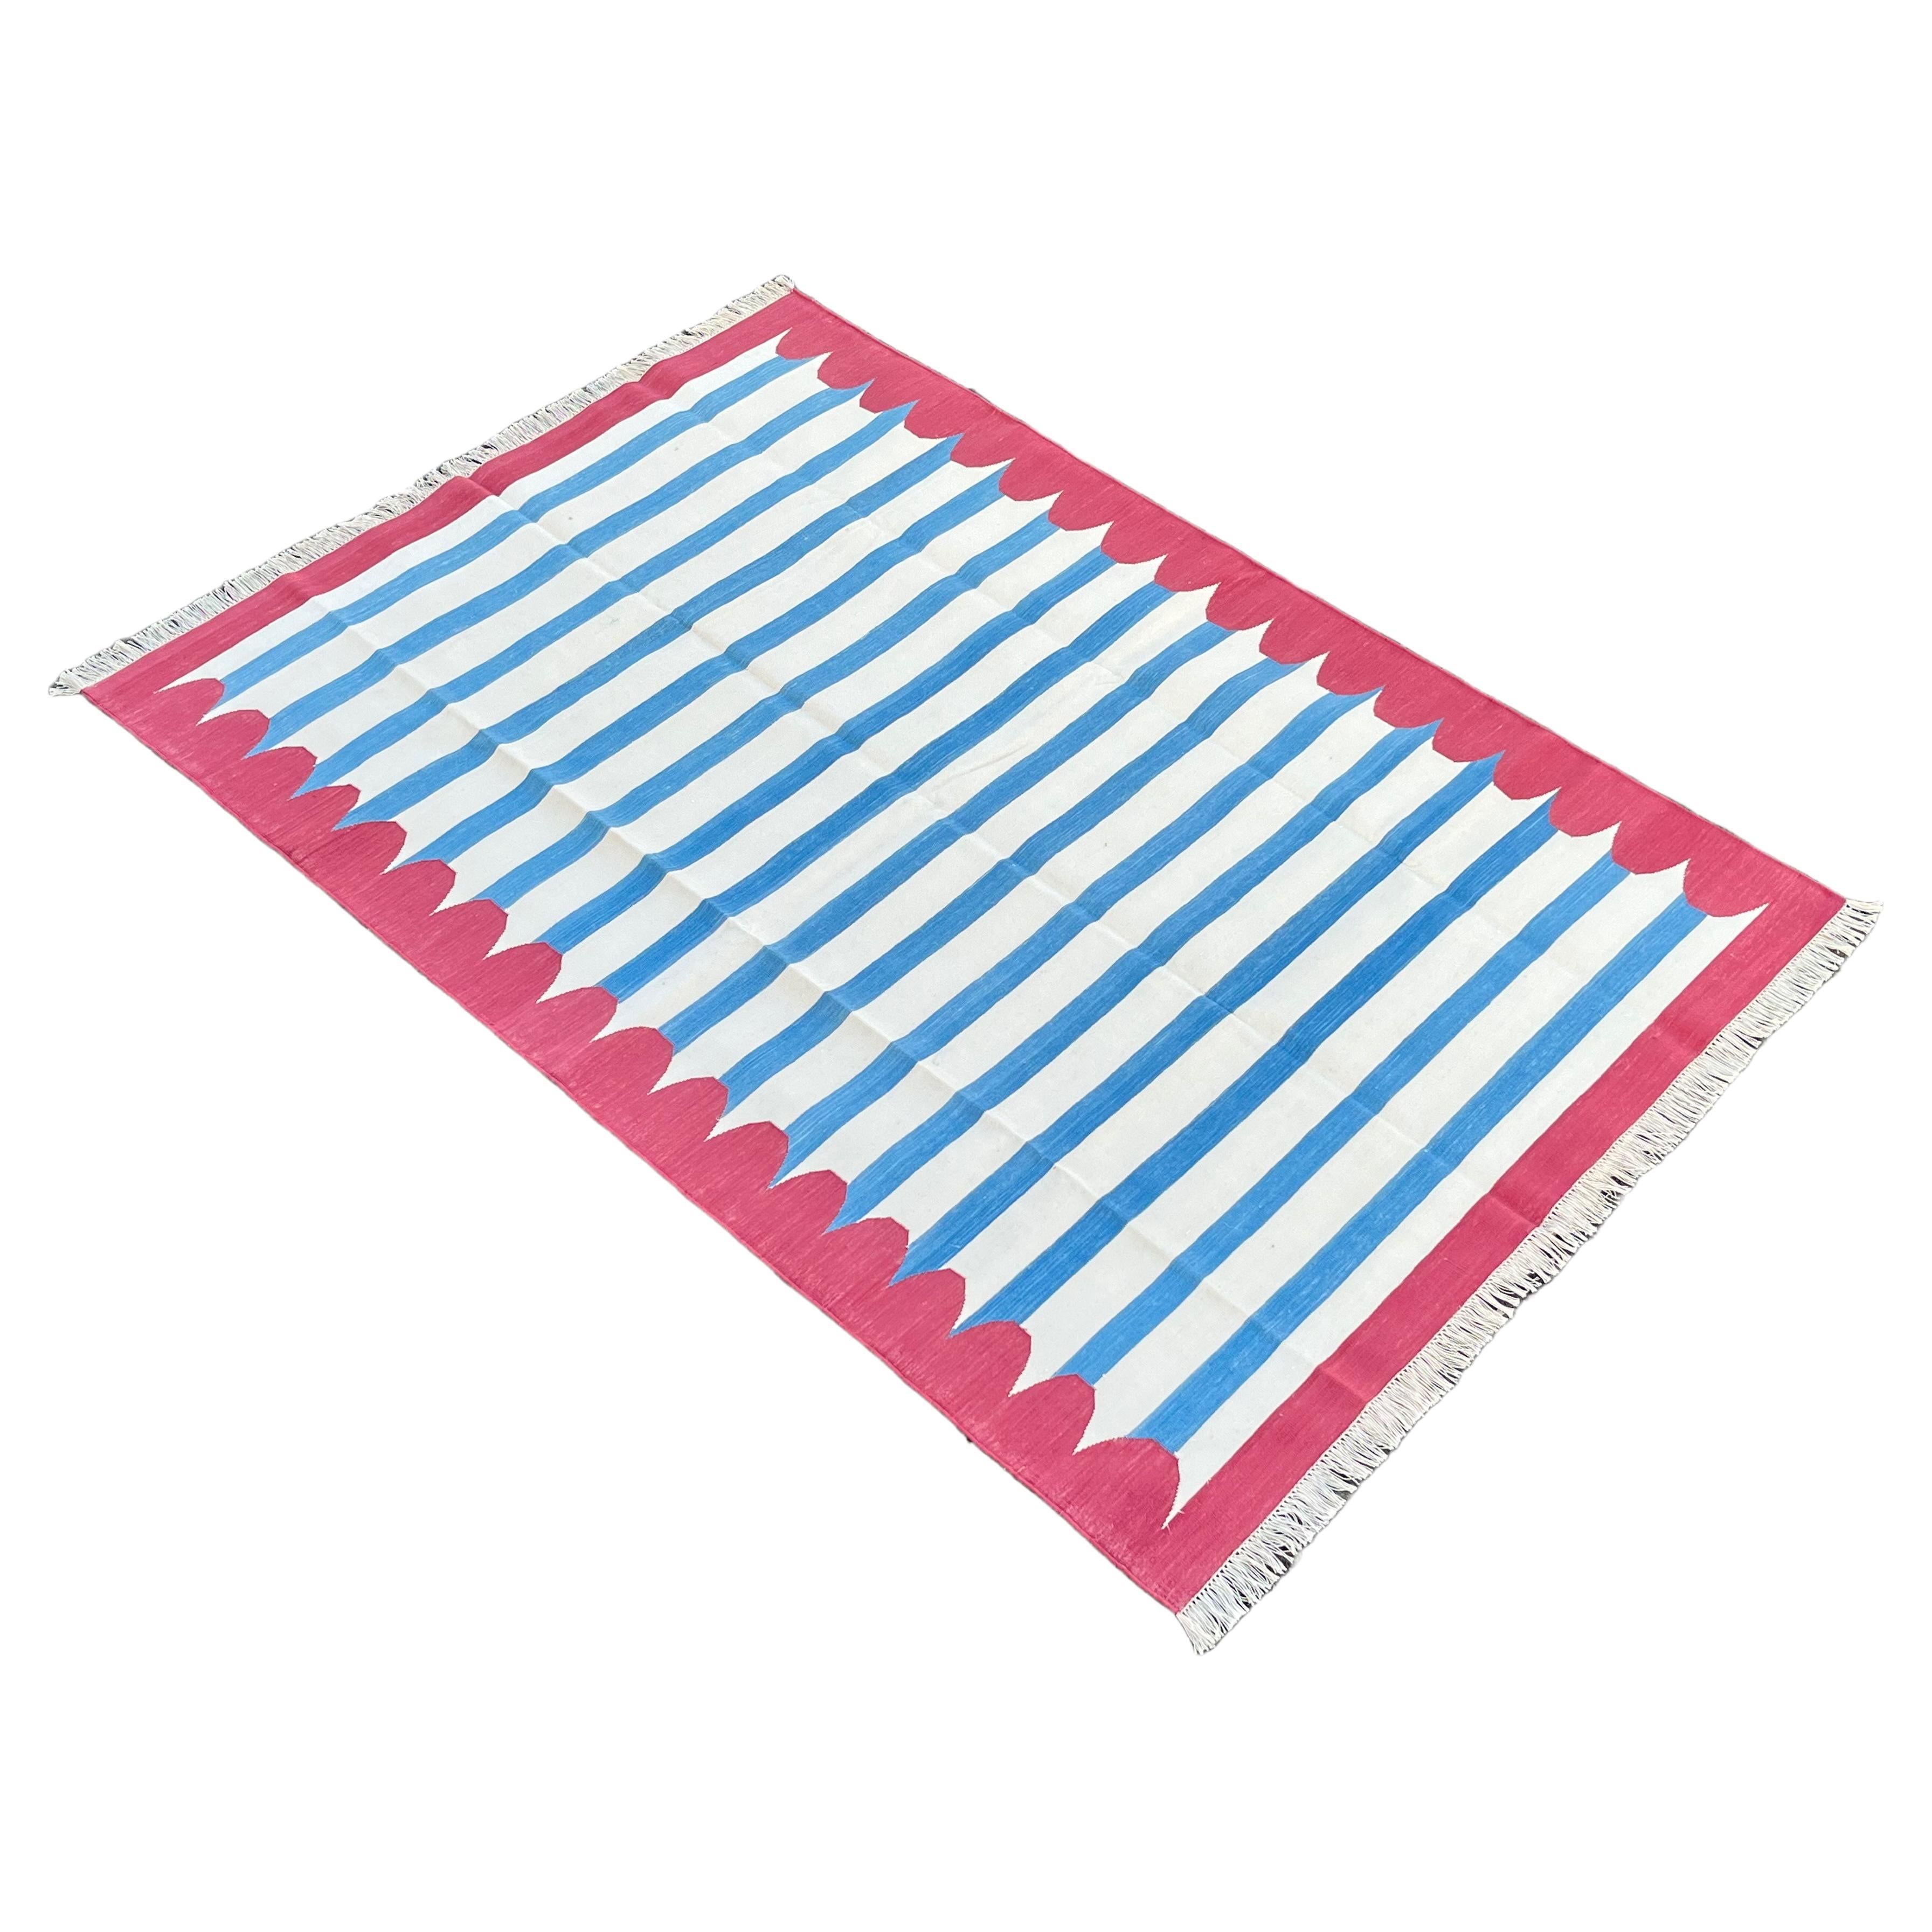 Handmade Cotton Area Flat Weave Rug, 5x7 Pink And Blue Scalloped Indian Dhurrie For Sale